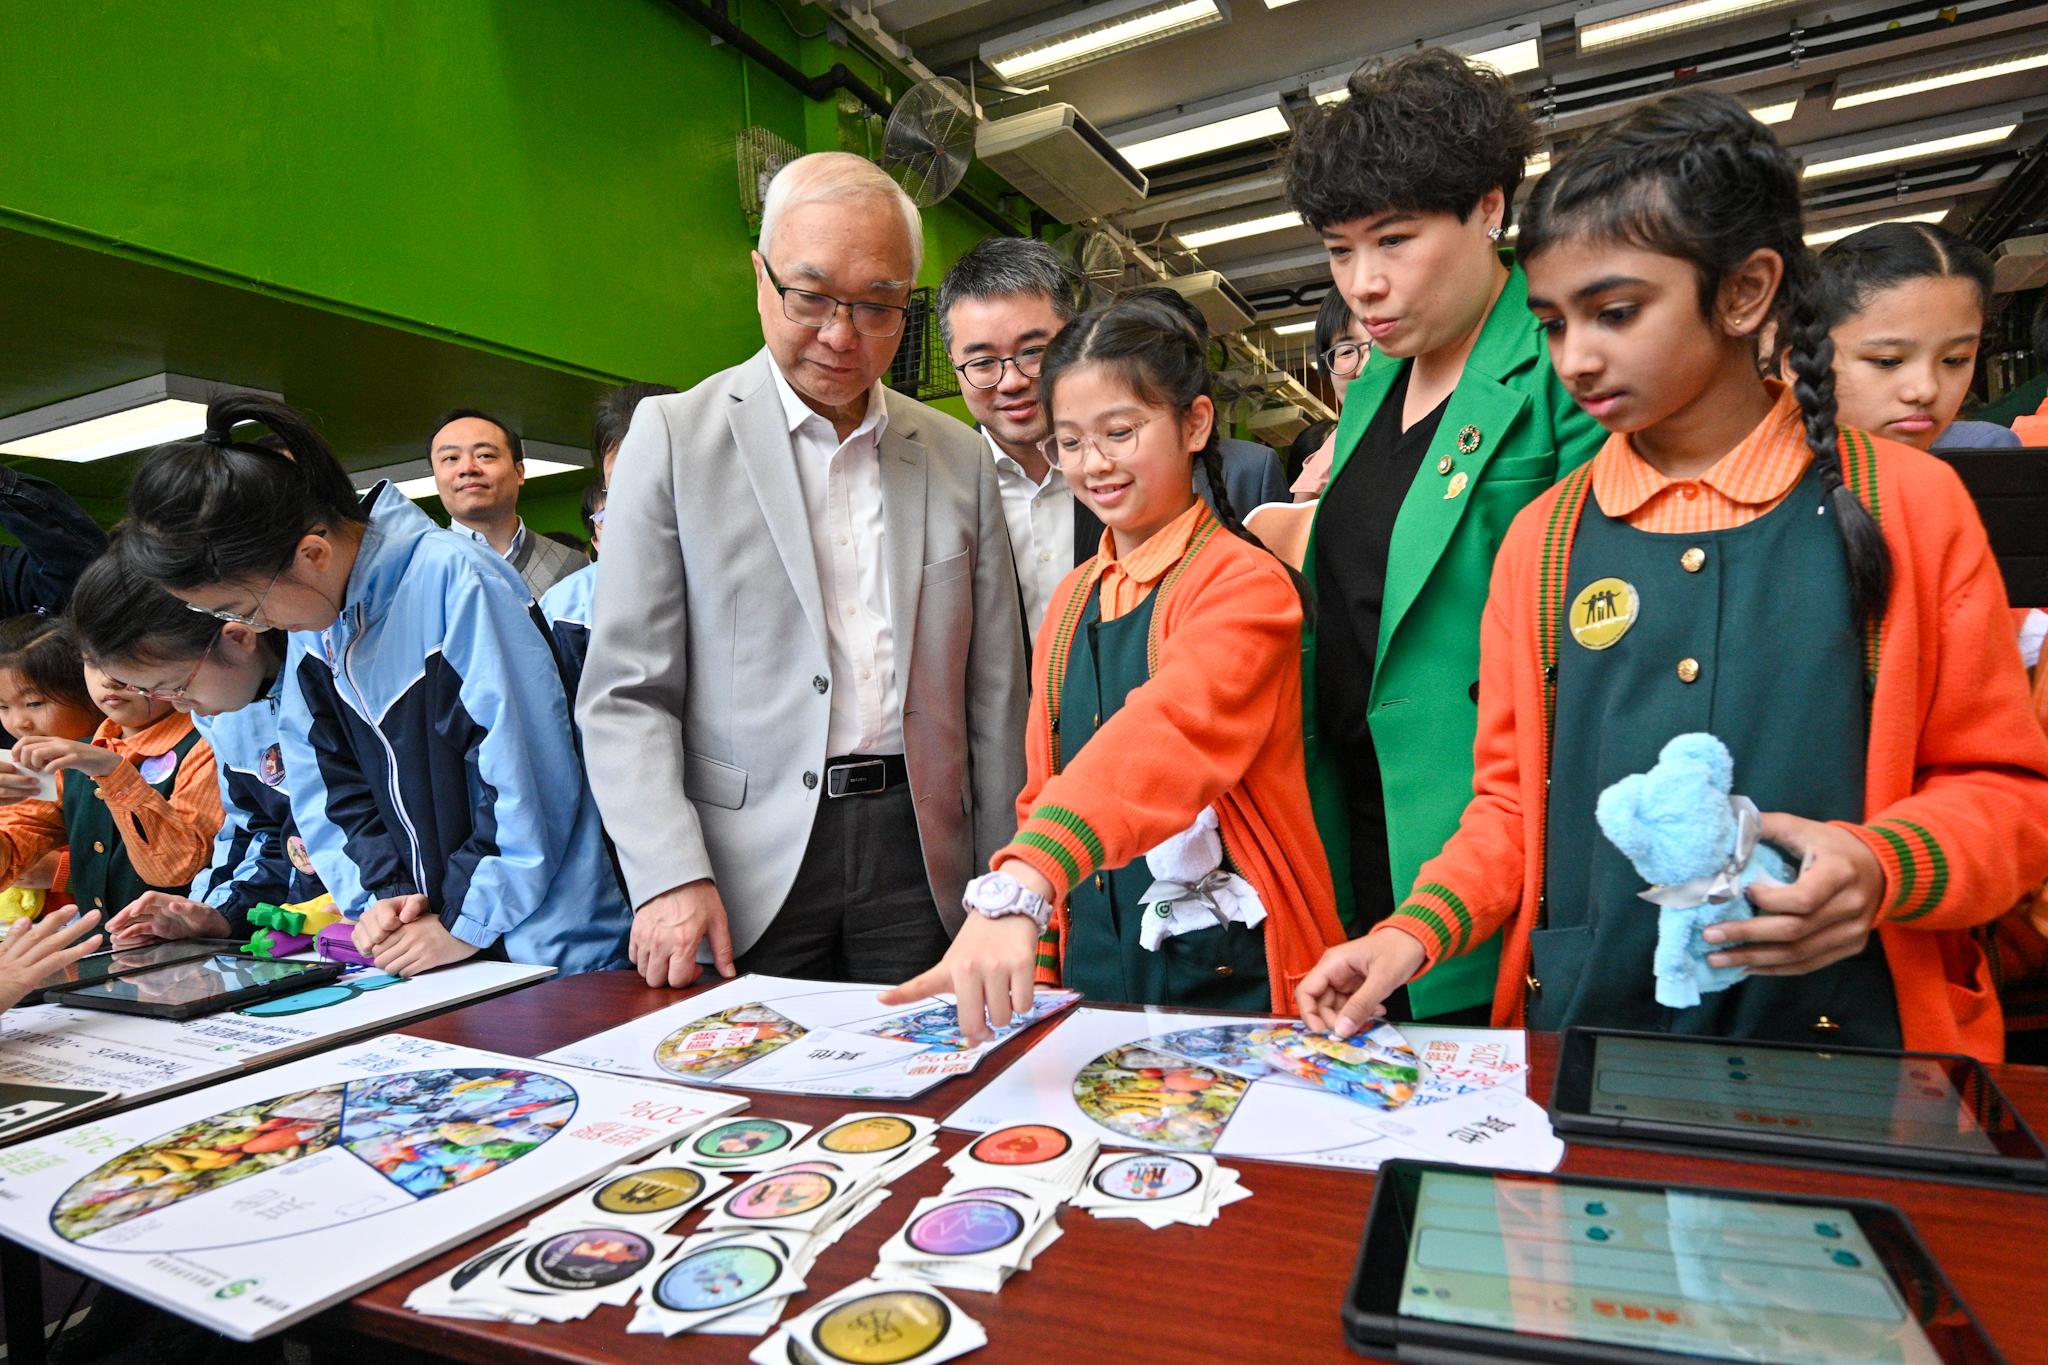 The Secretary for Environment and Ecology, Mr Tse Chin-wan, and the Under Secretary for Education, Mr Sze Chun-fai, today (January 16) visited Yaumati Kaifong Association School to promote municipal solid waste (MSW) charging to students. Photo shows Mr Tse (fifth right) and Mr Sze (fourth right) participating in a quiz game on MSW charging together with school students.